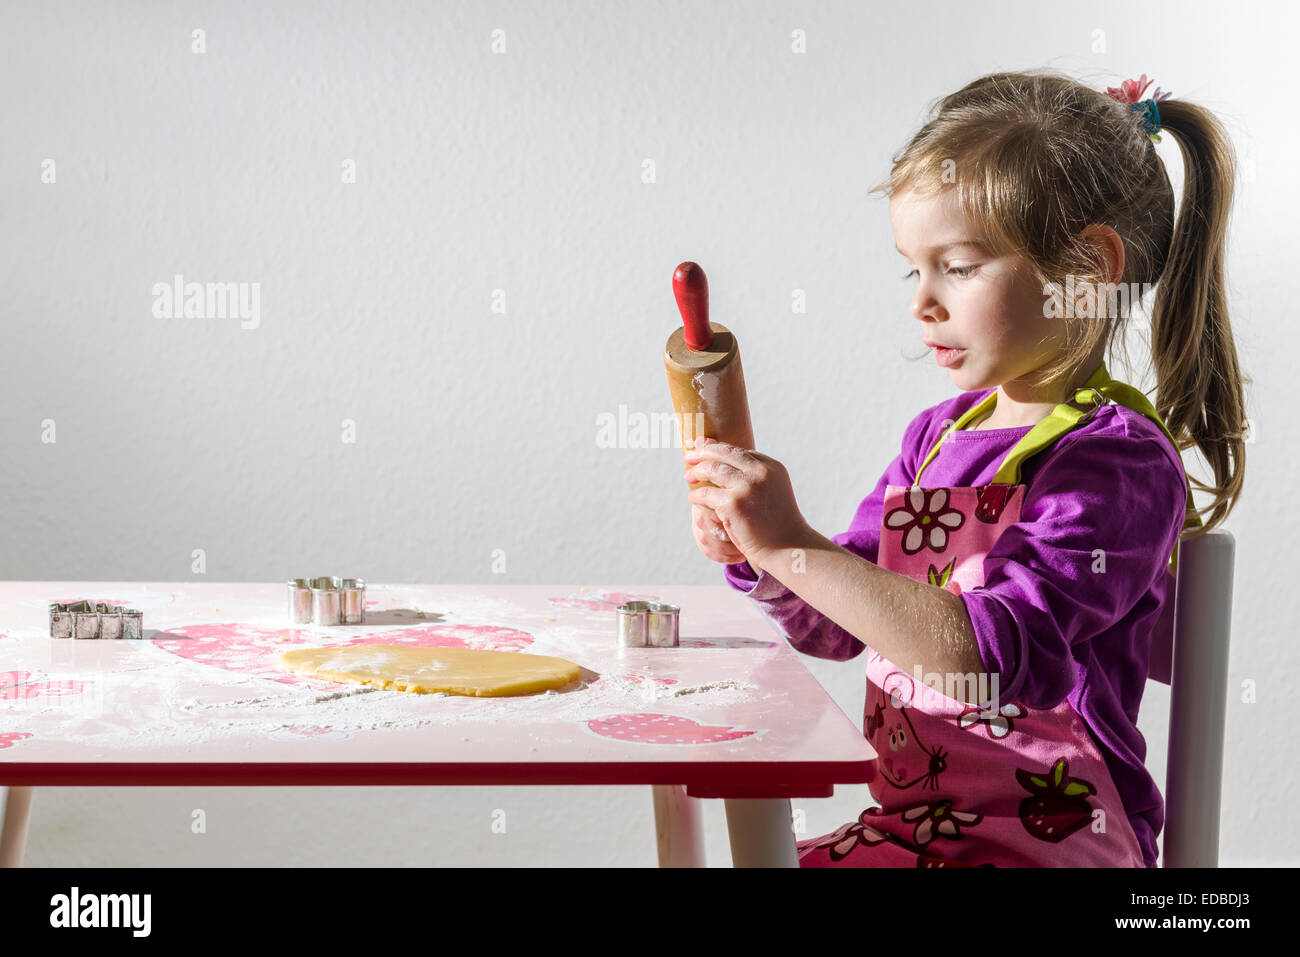 Girl, 3 years, baking Christmas cookies, rolling out dough on a table Stock Photo